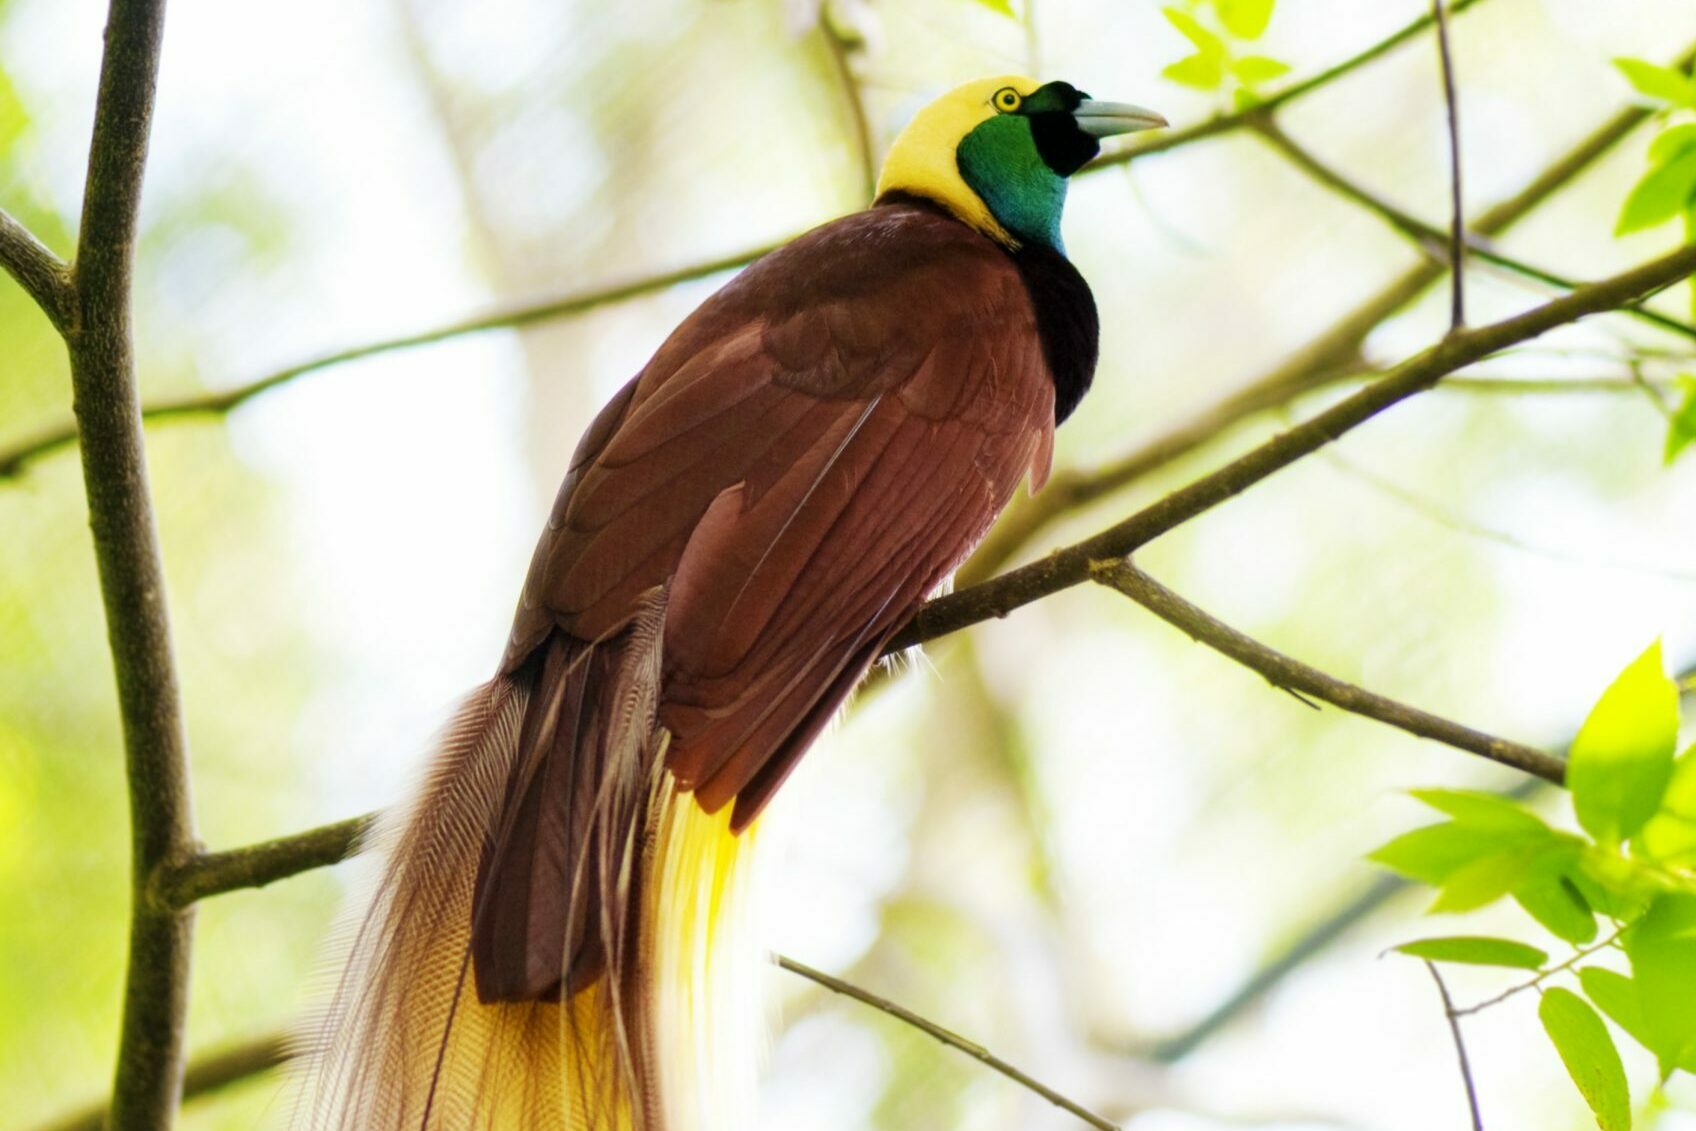 Male Lesser Bird-Of-Paradise perched on a branch